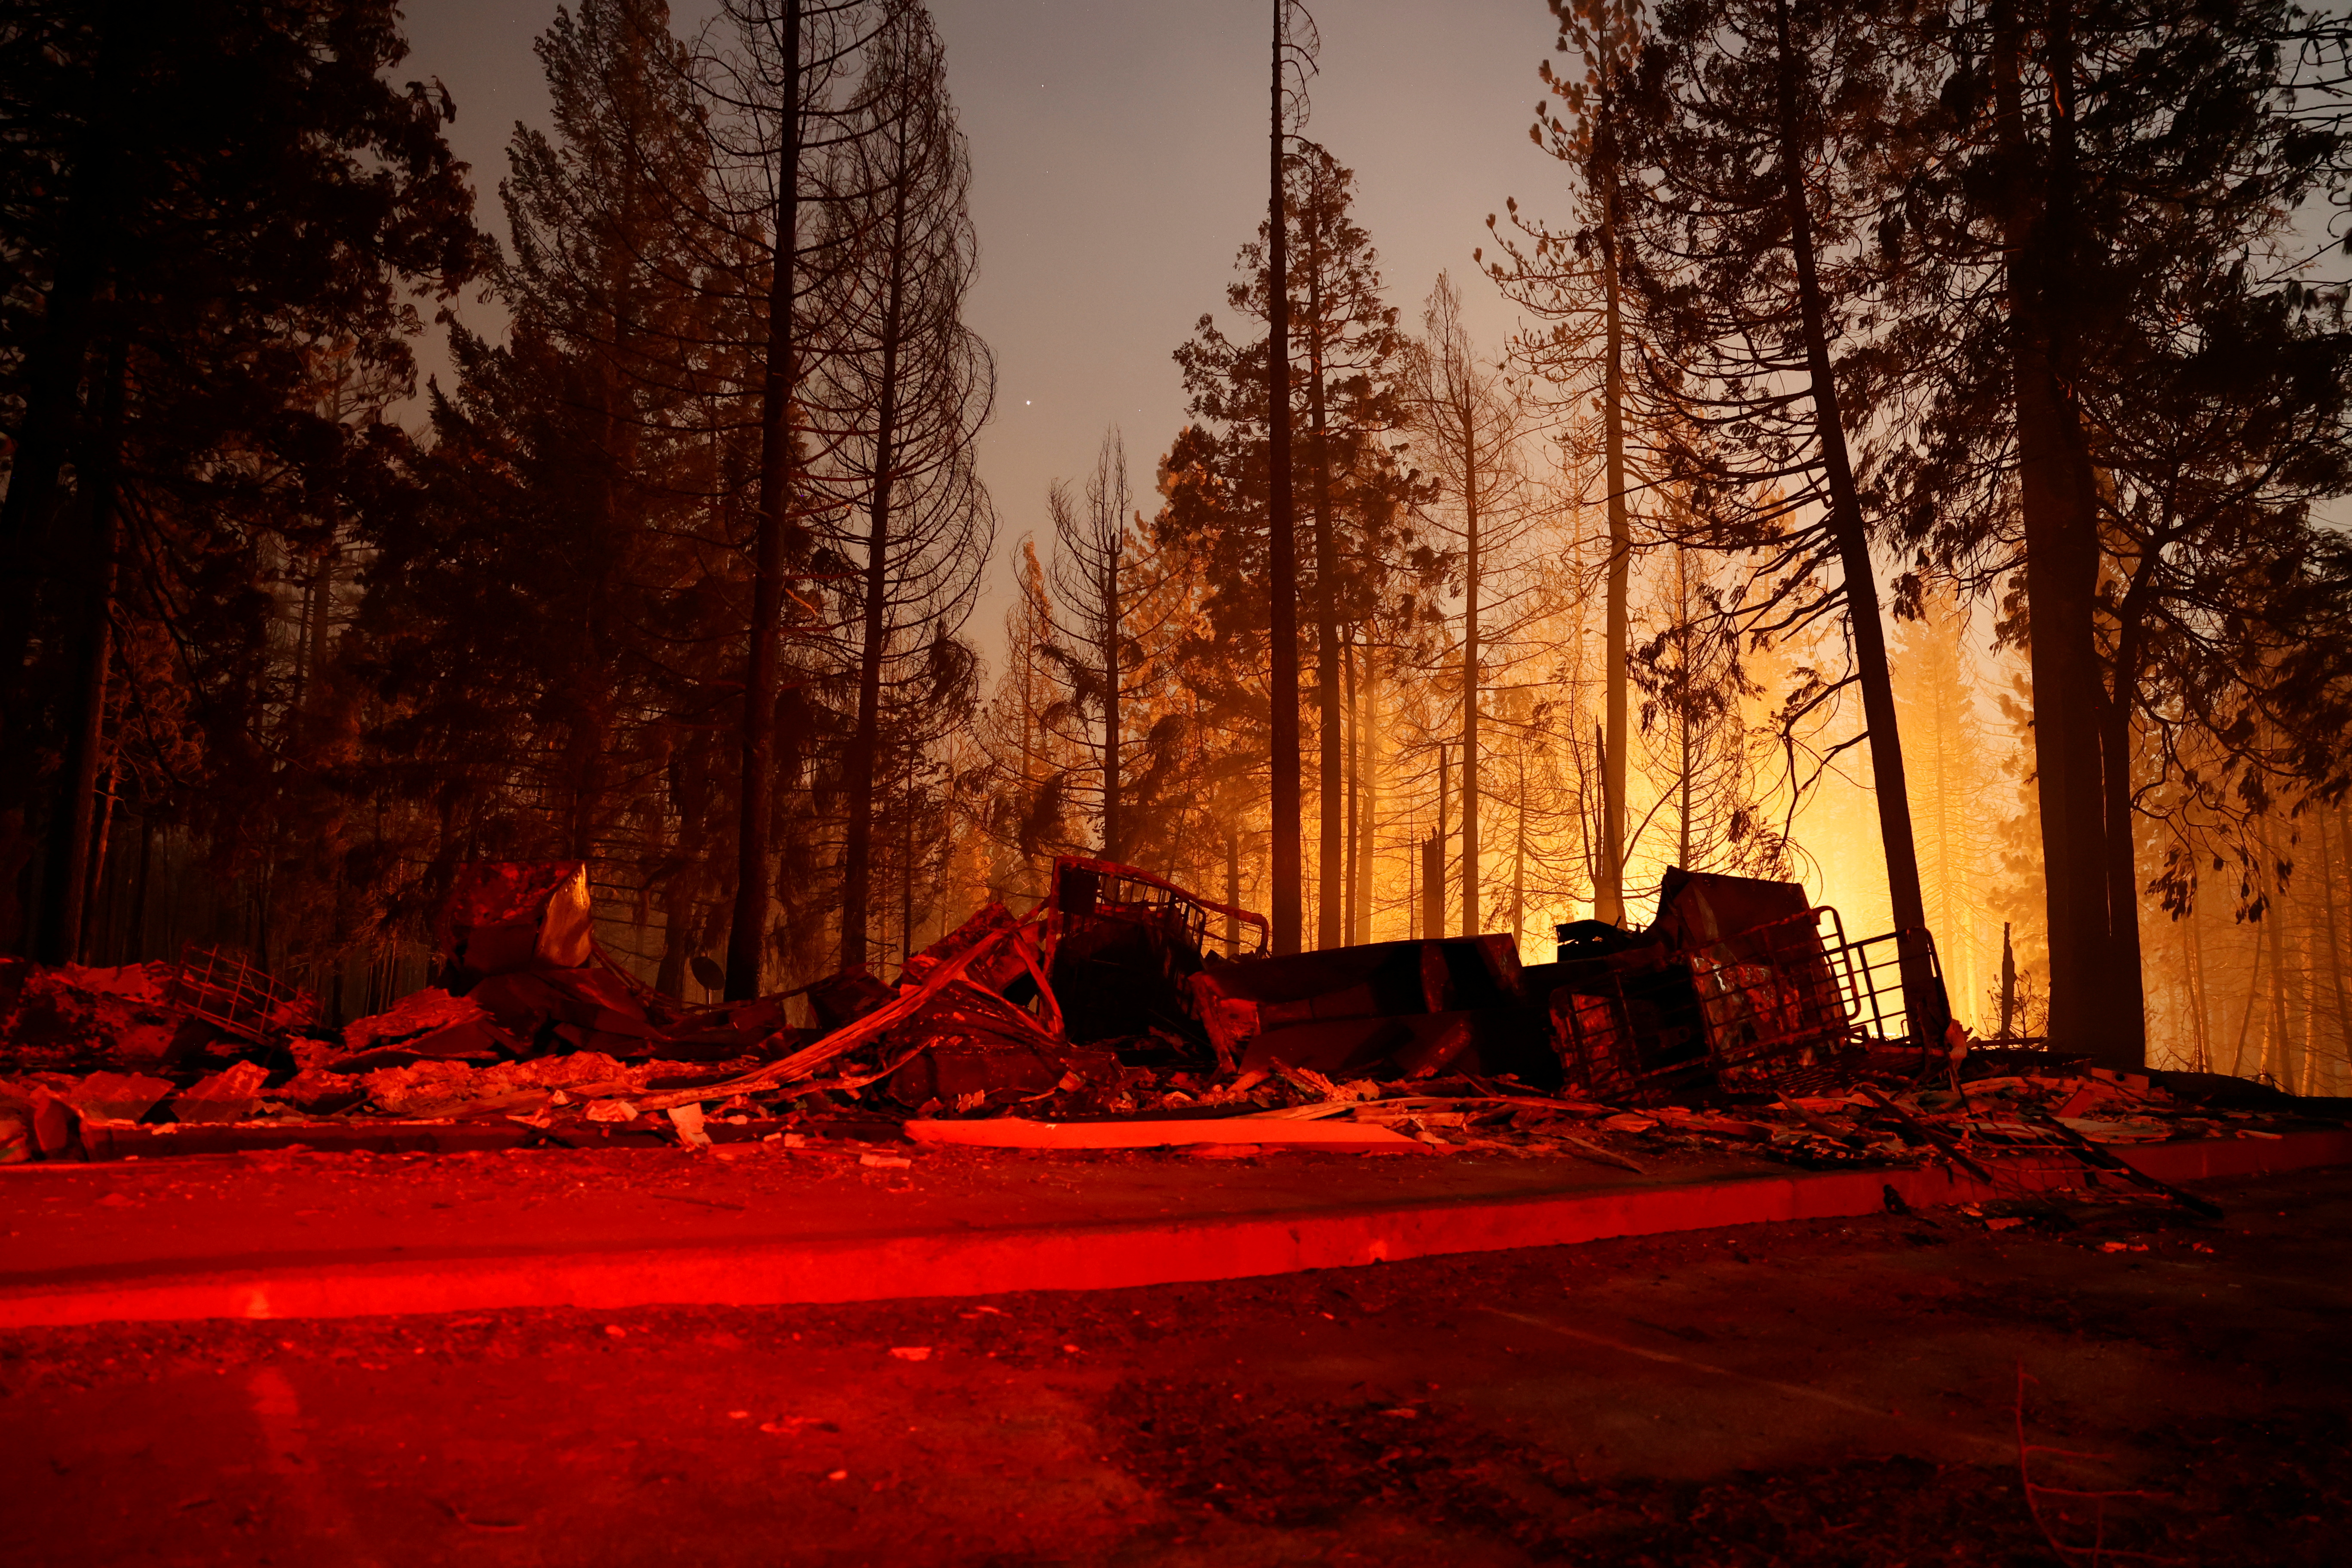 Aftermath of Caldor Fire in Grizzly Flats, California